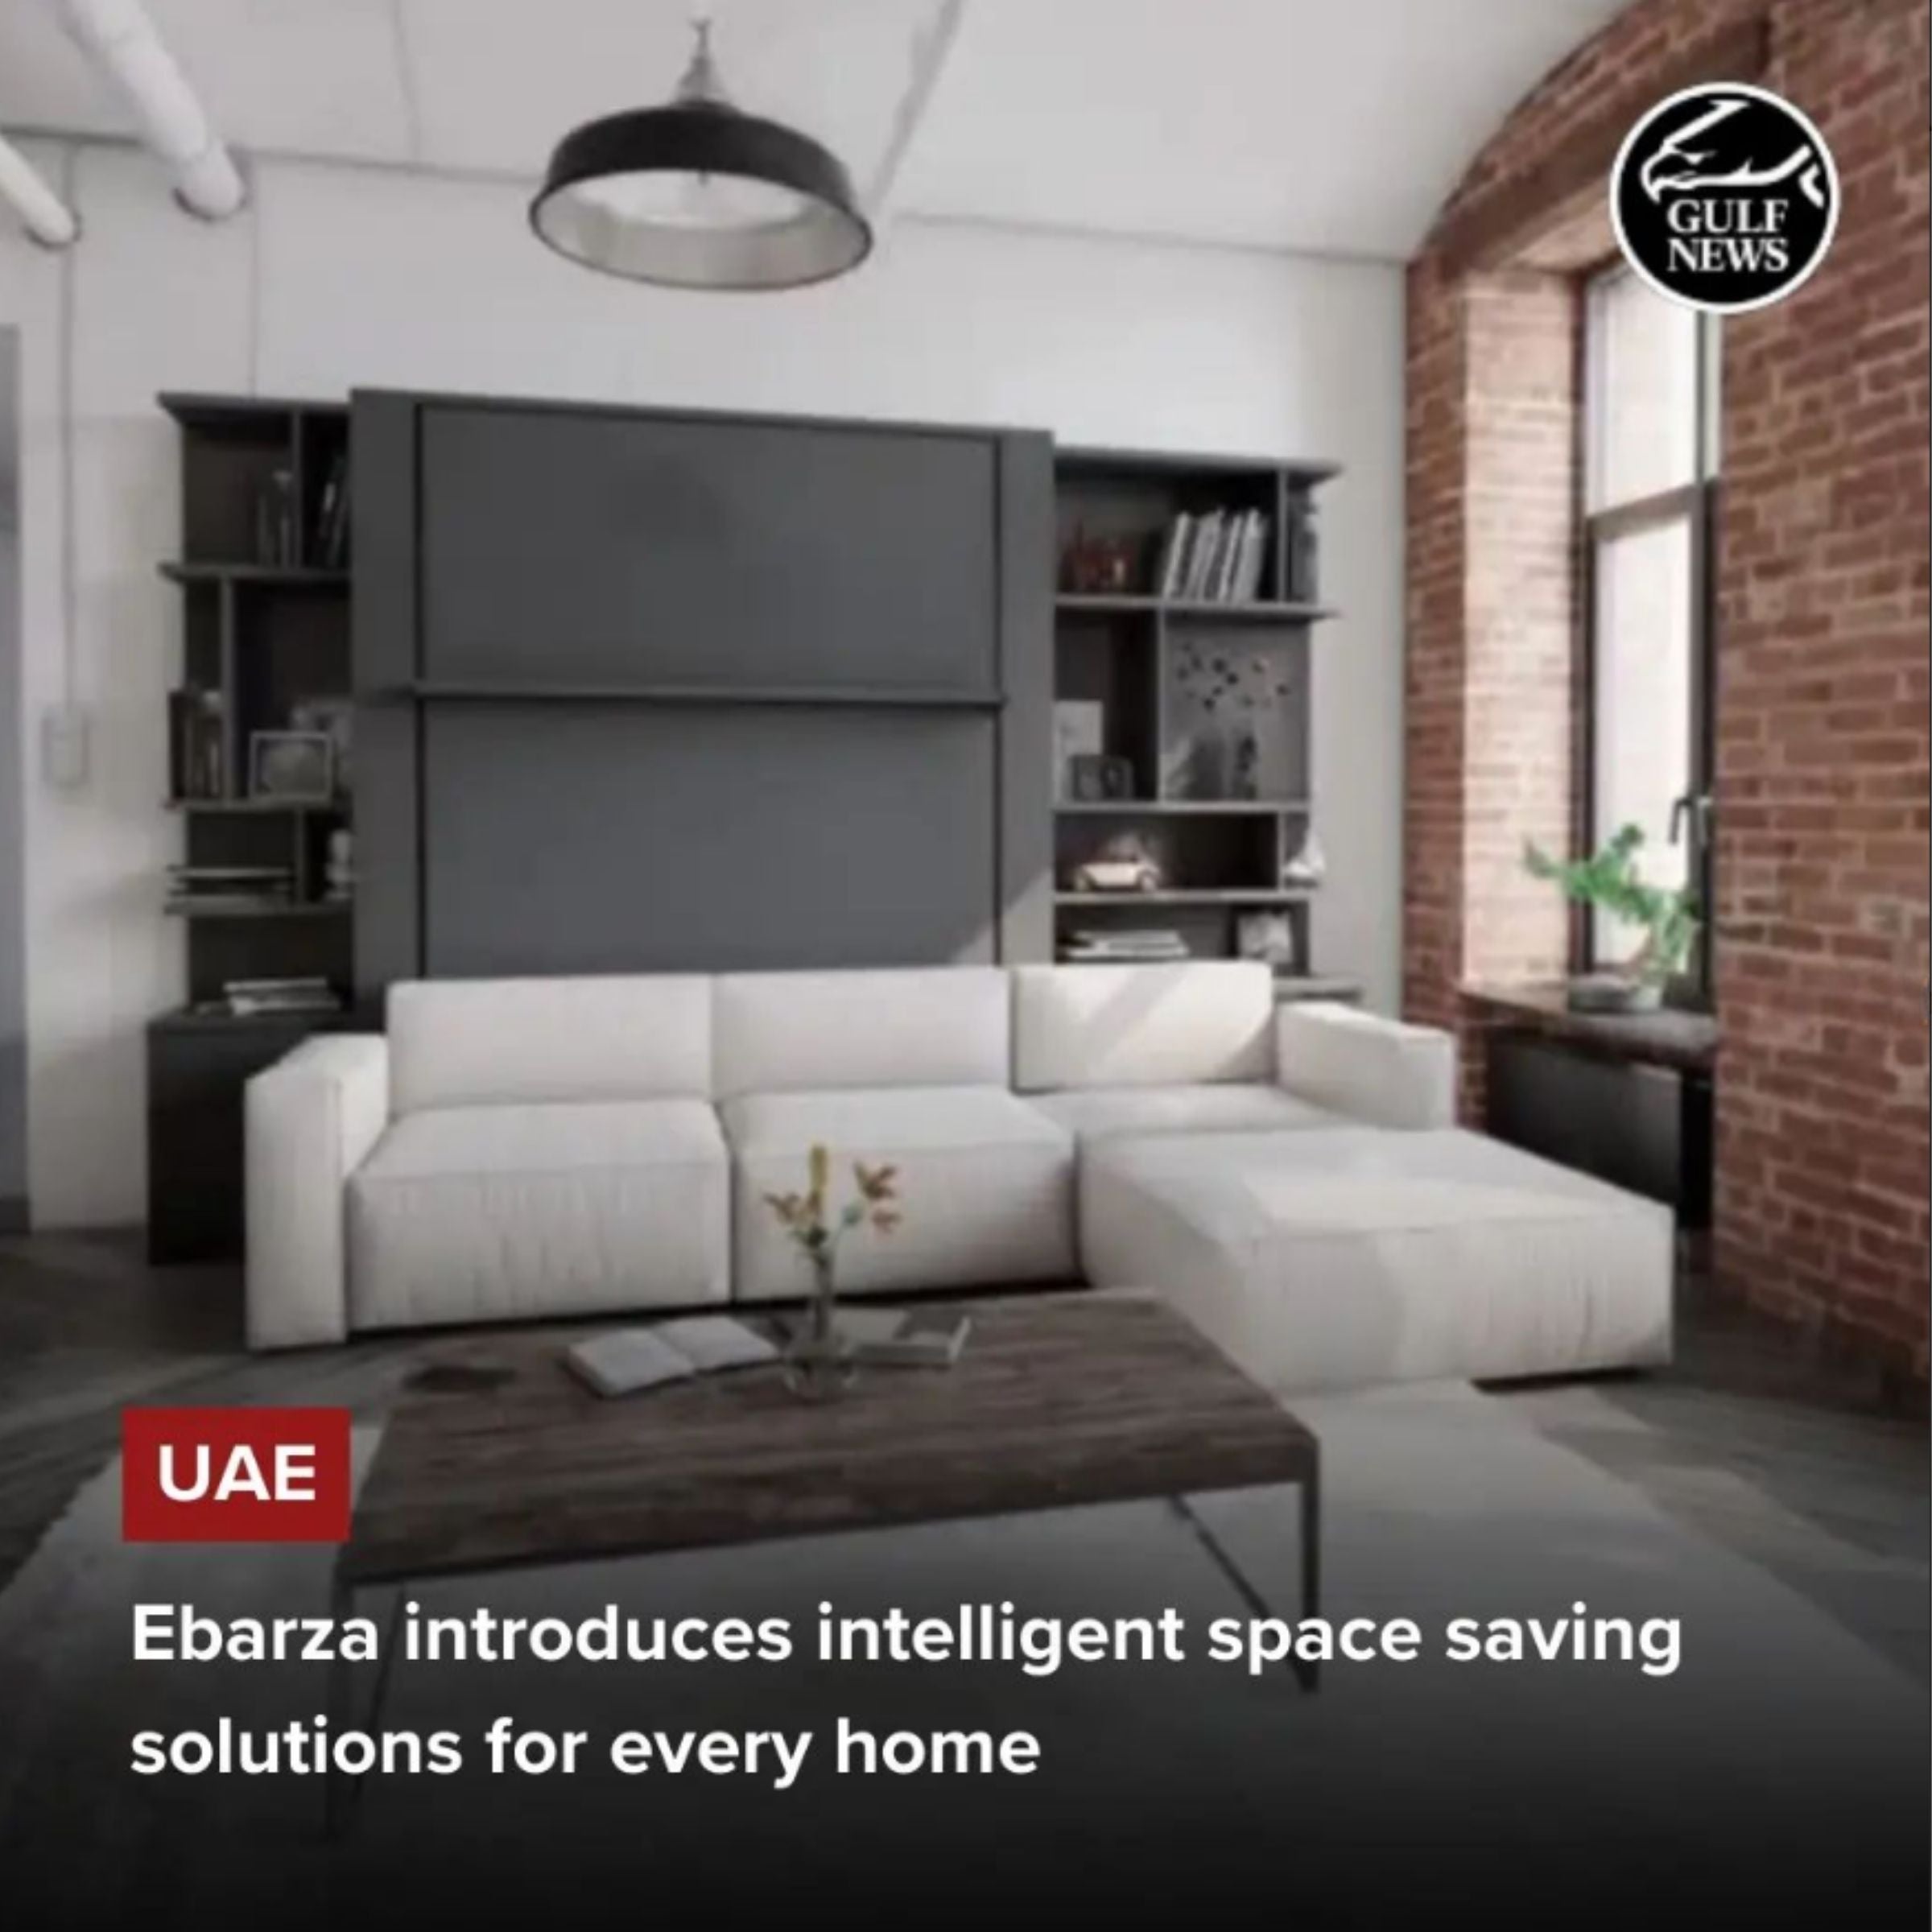 Ebarza introduces intelligent space saving solutions for every home